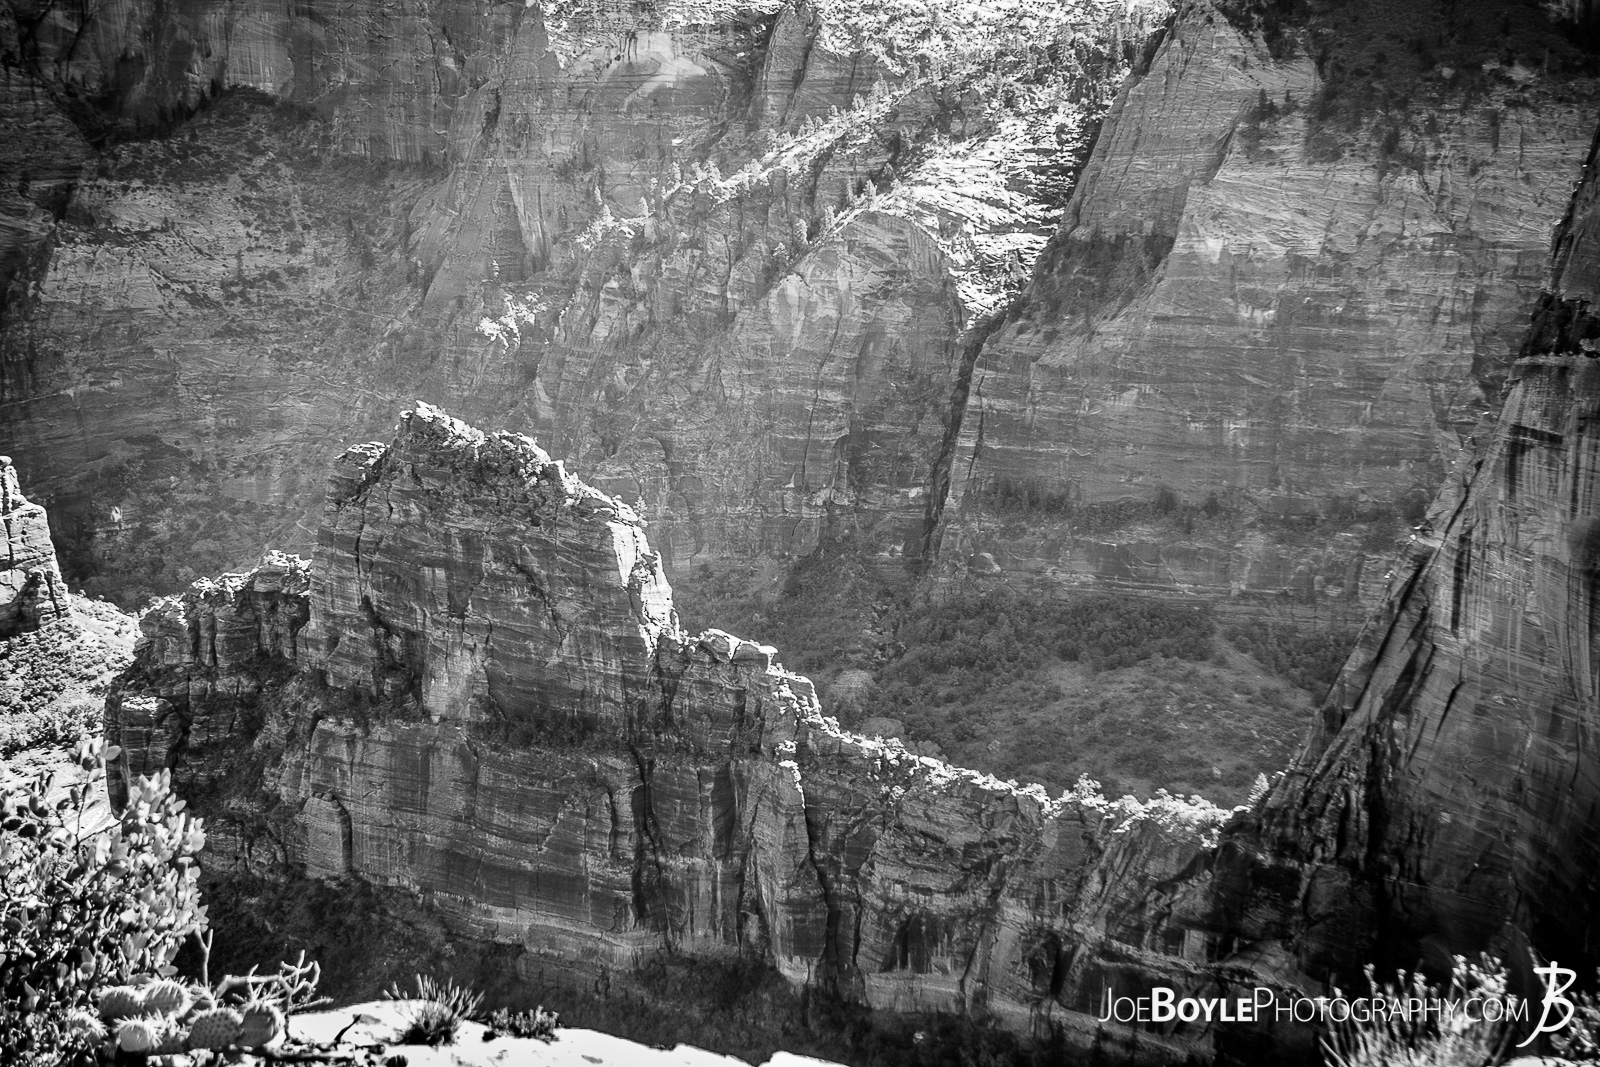  While hiking on the West Rim Trail in Zion National Park my hiking buddy and I were able to see many mountains, canyons and valleys! This is a photo of a cliff we saw near Angel's Landing! We finished up this leg of the trip hiking Angel's Landing and exited at The Grotto.  Here are some links to more articles and hiking info about the West Rim Trail and hiking trails in Zion National Park and a Map of Zion National Park. 